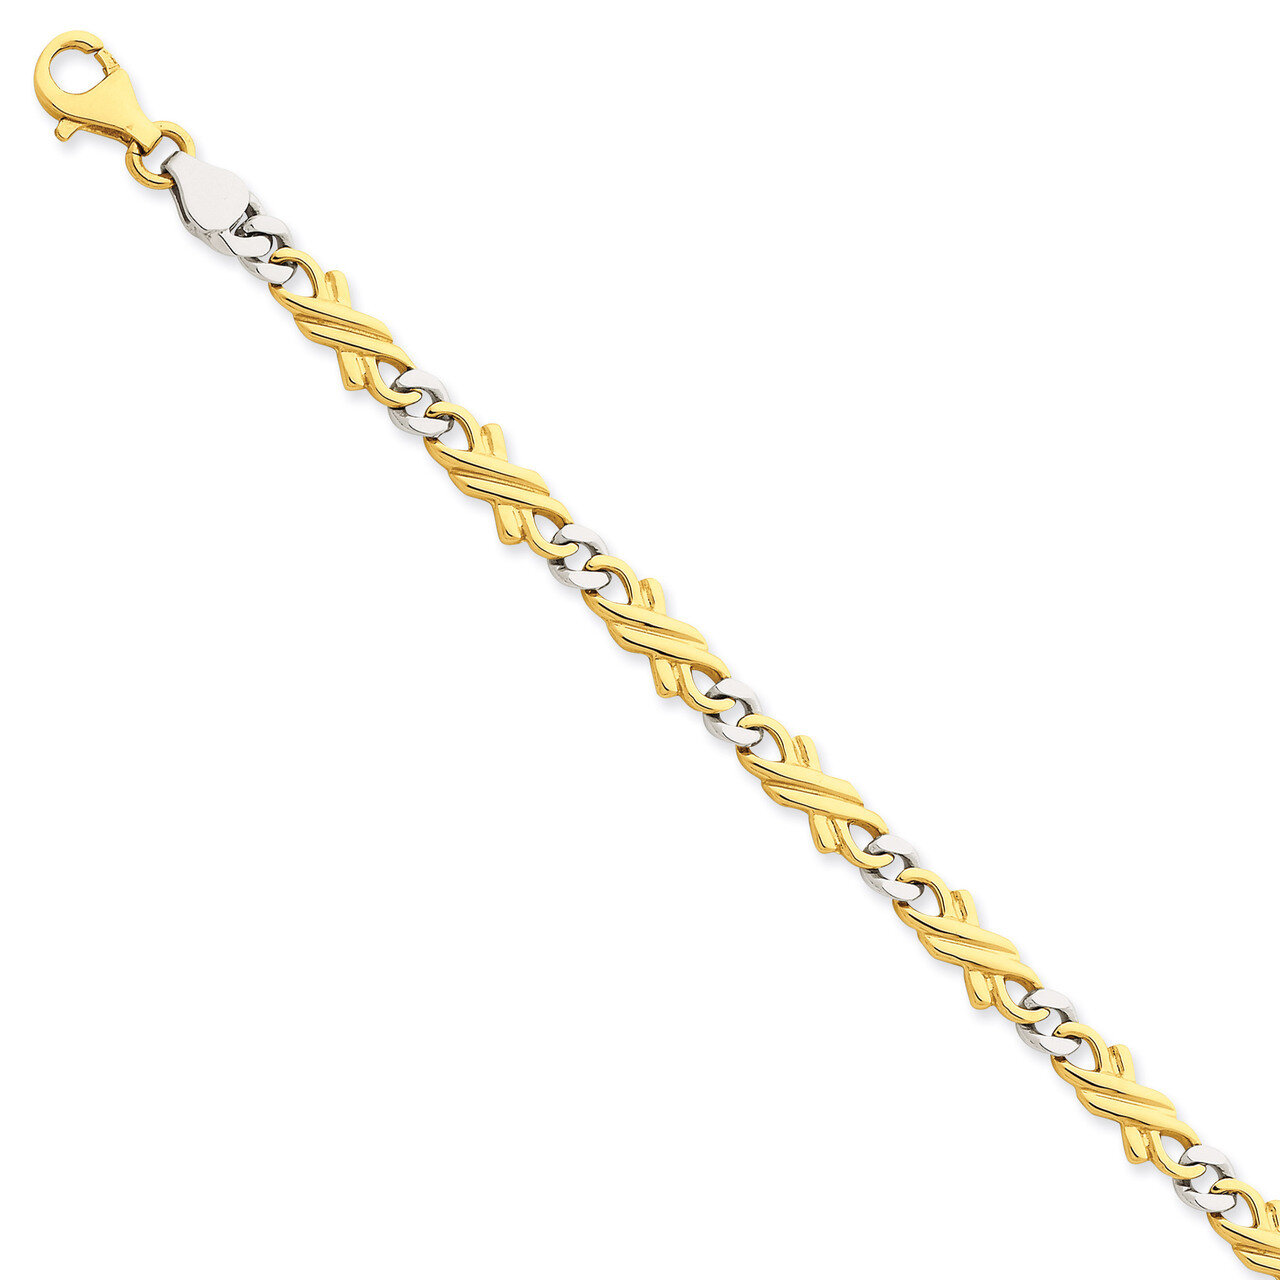 6mm Hand-Polished Fancy Link Chain 7 Inch 14k Two-Tone Gold LK223-7